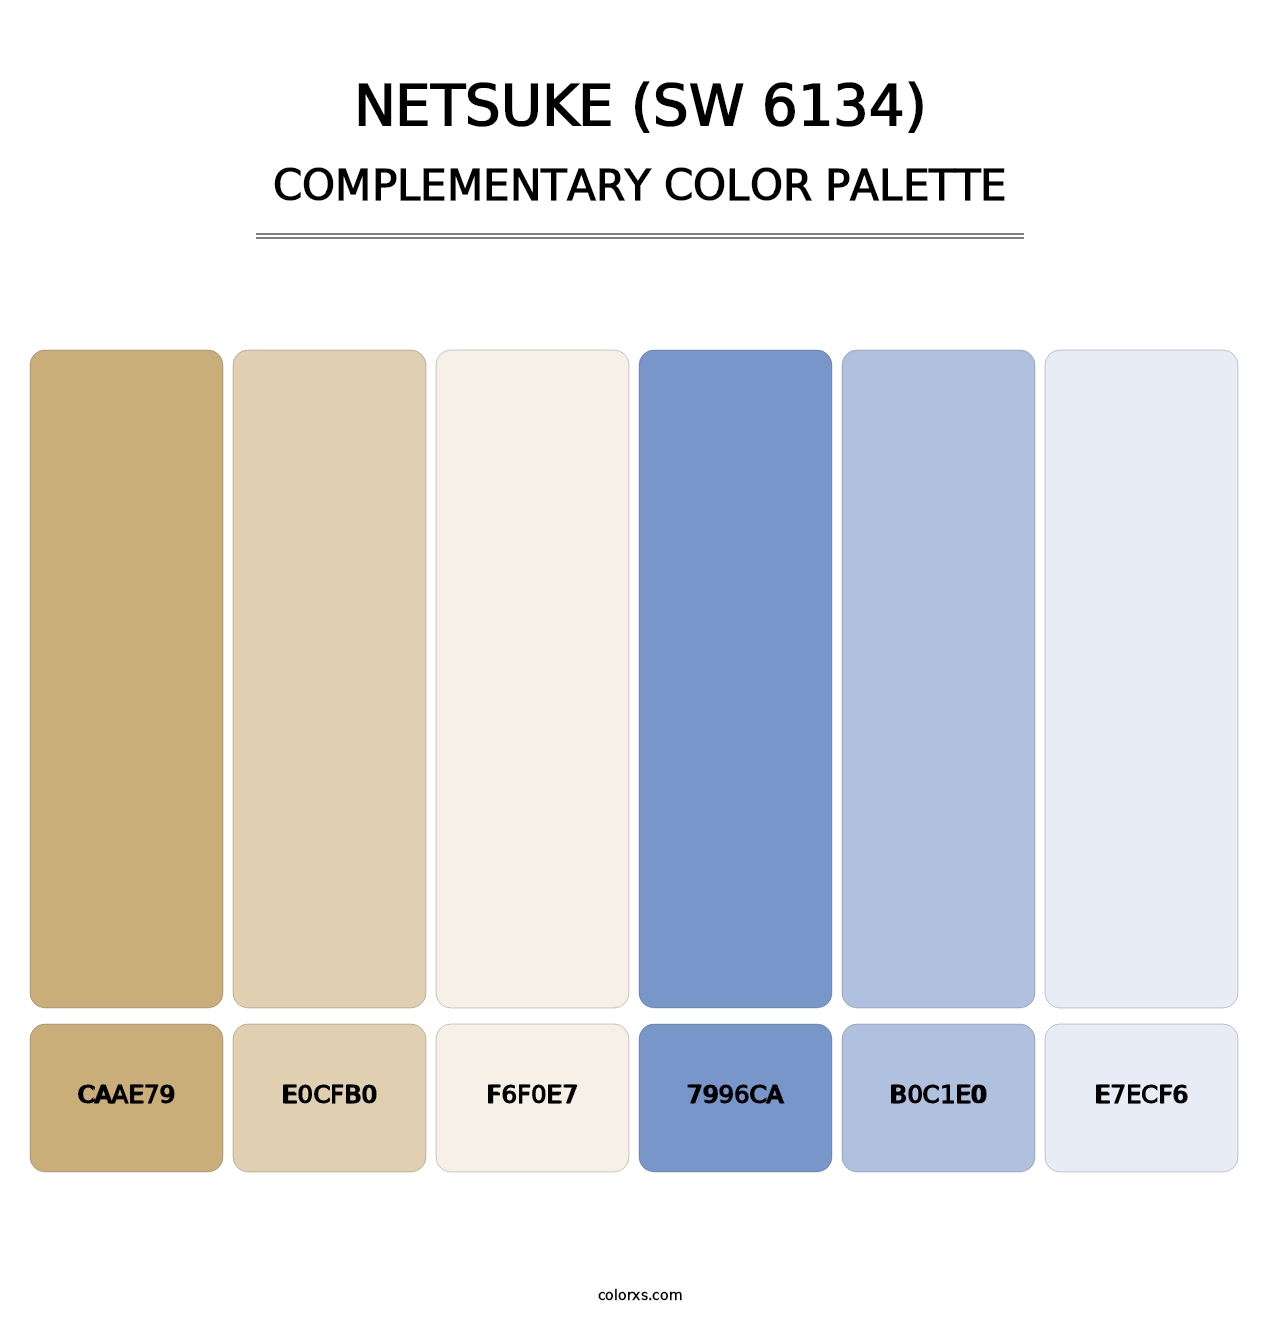 Netsuke (SW 6134) - Complementary Color Palette